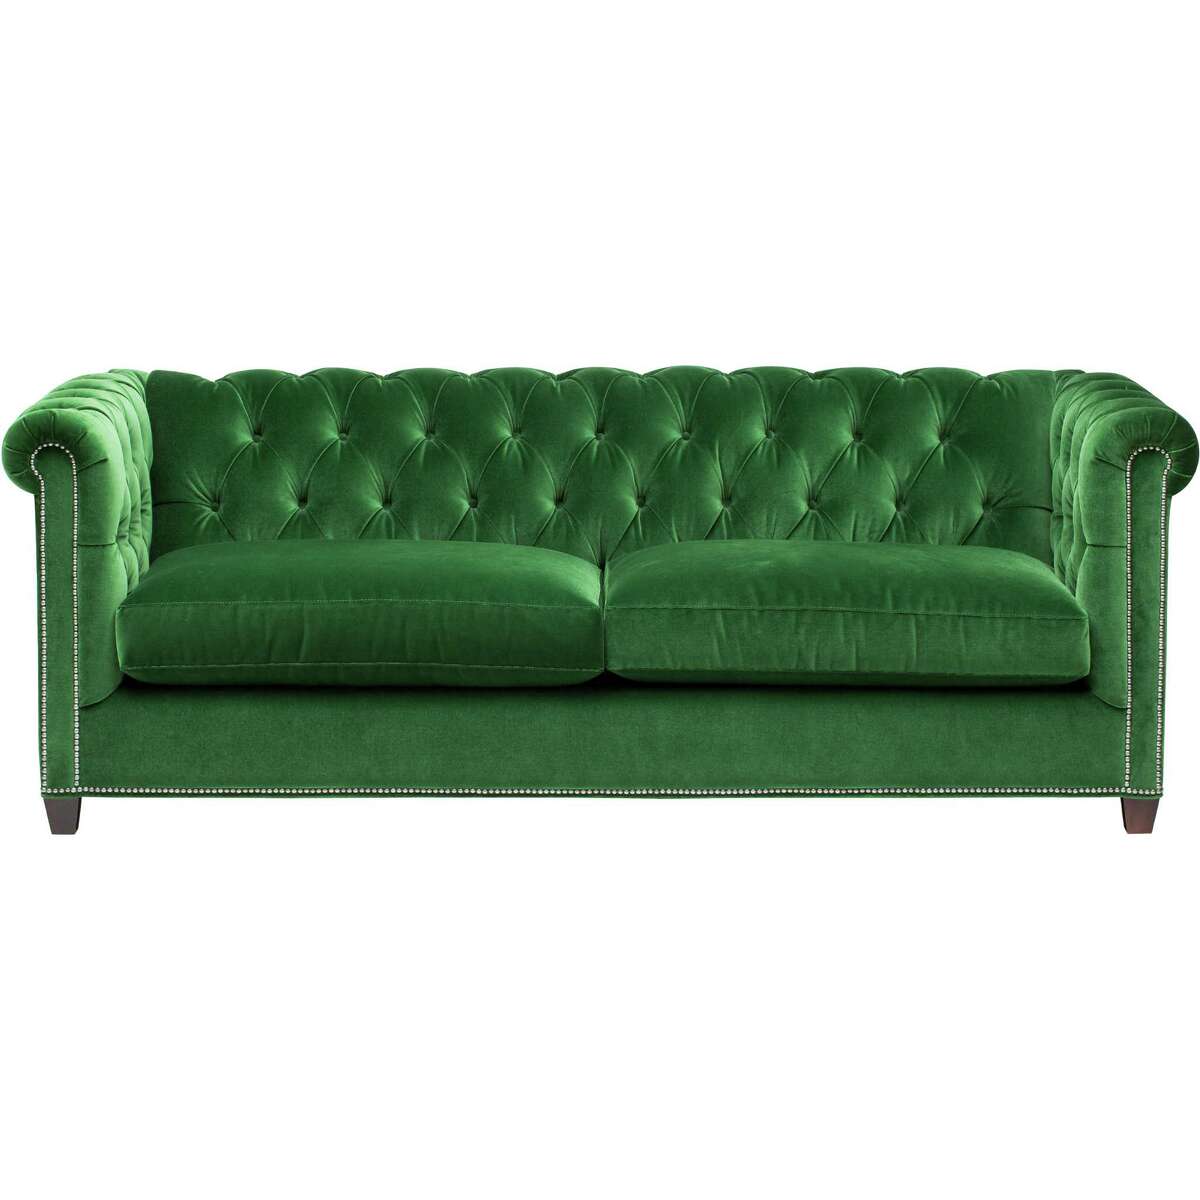 A modern take on the classic Chesterfield-style, the William sofa has a diamond-tufted back and arms and is covered in soft cotton velvet. Available at High Fashion Home; $1,999.